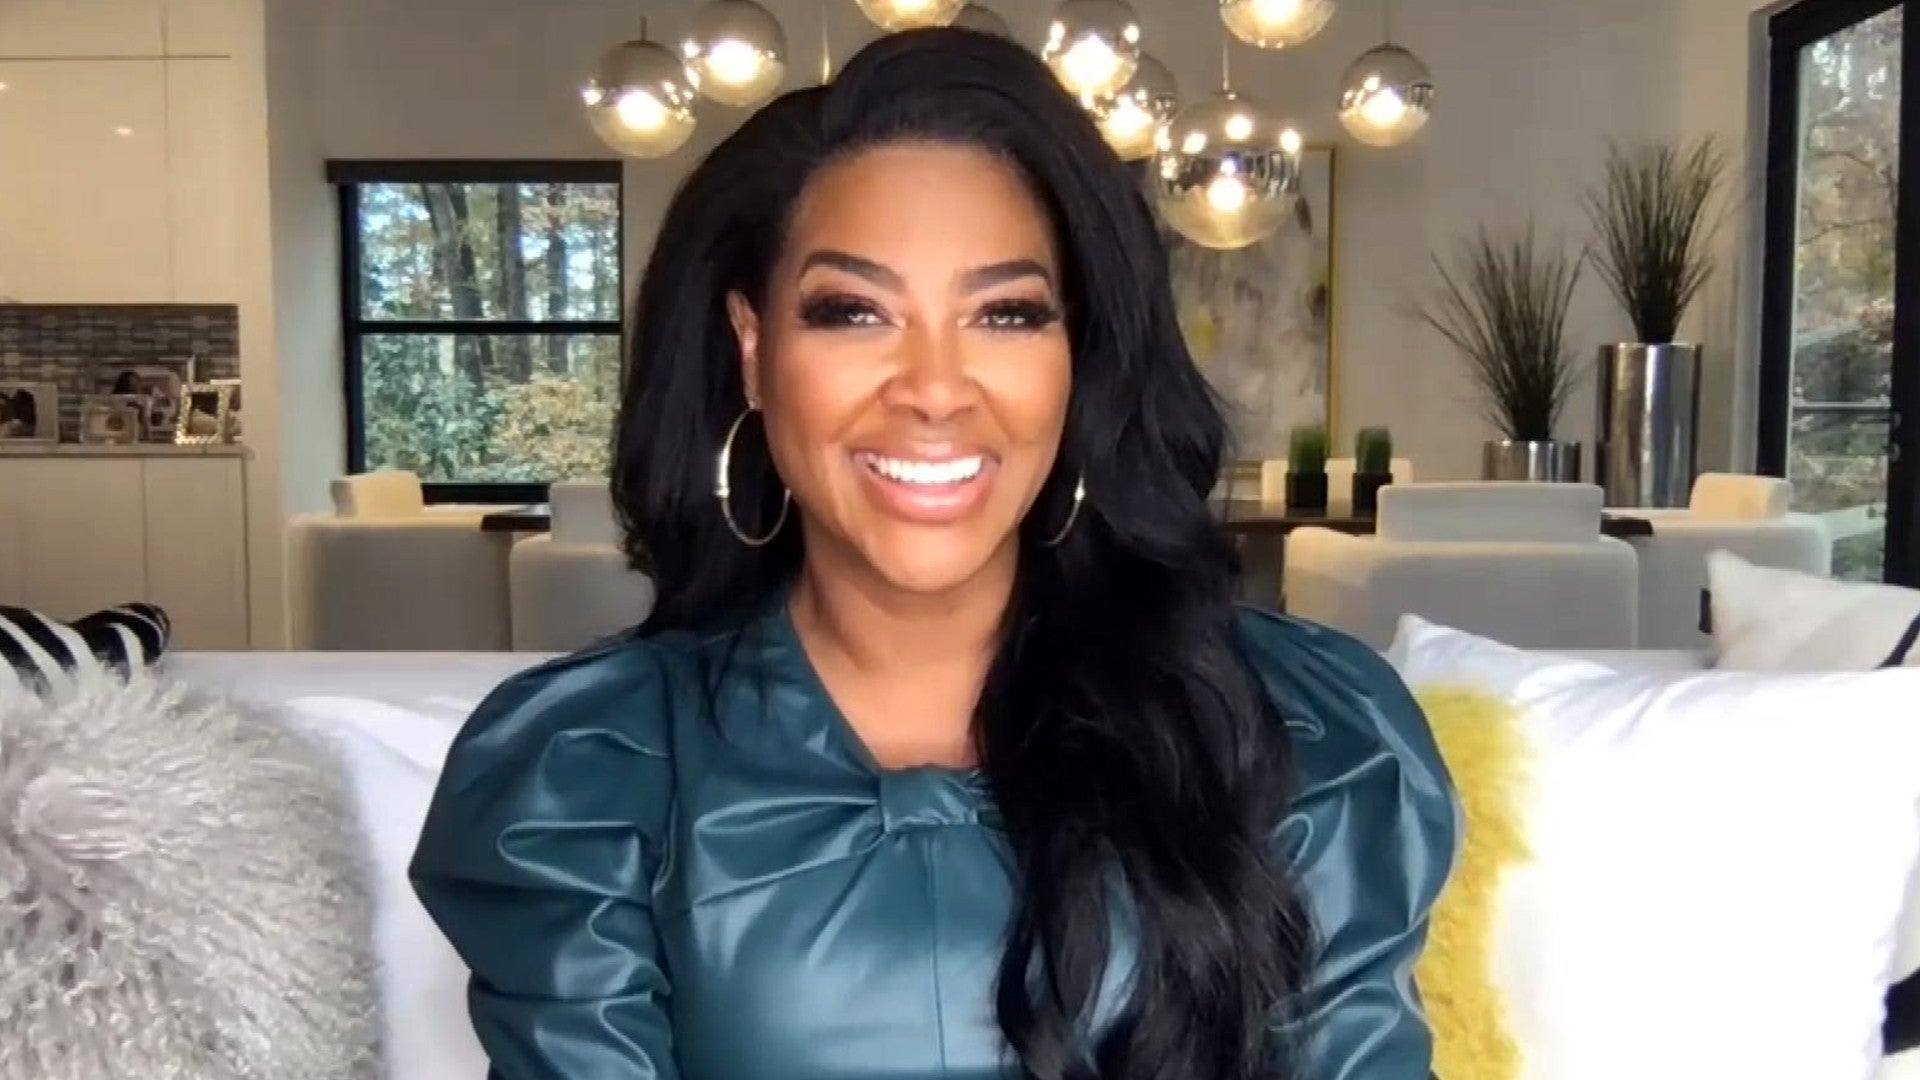 Kenya Moore Talks About Working Out With Her Fans Check Out Her Photo At The Gym